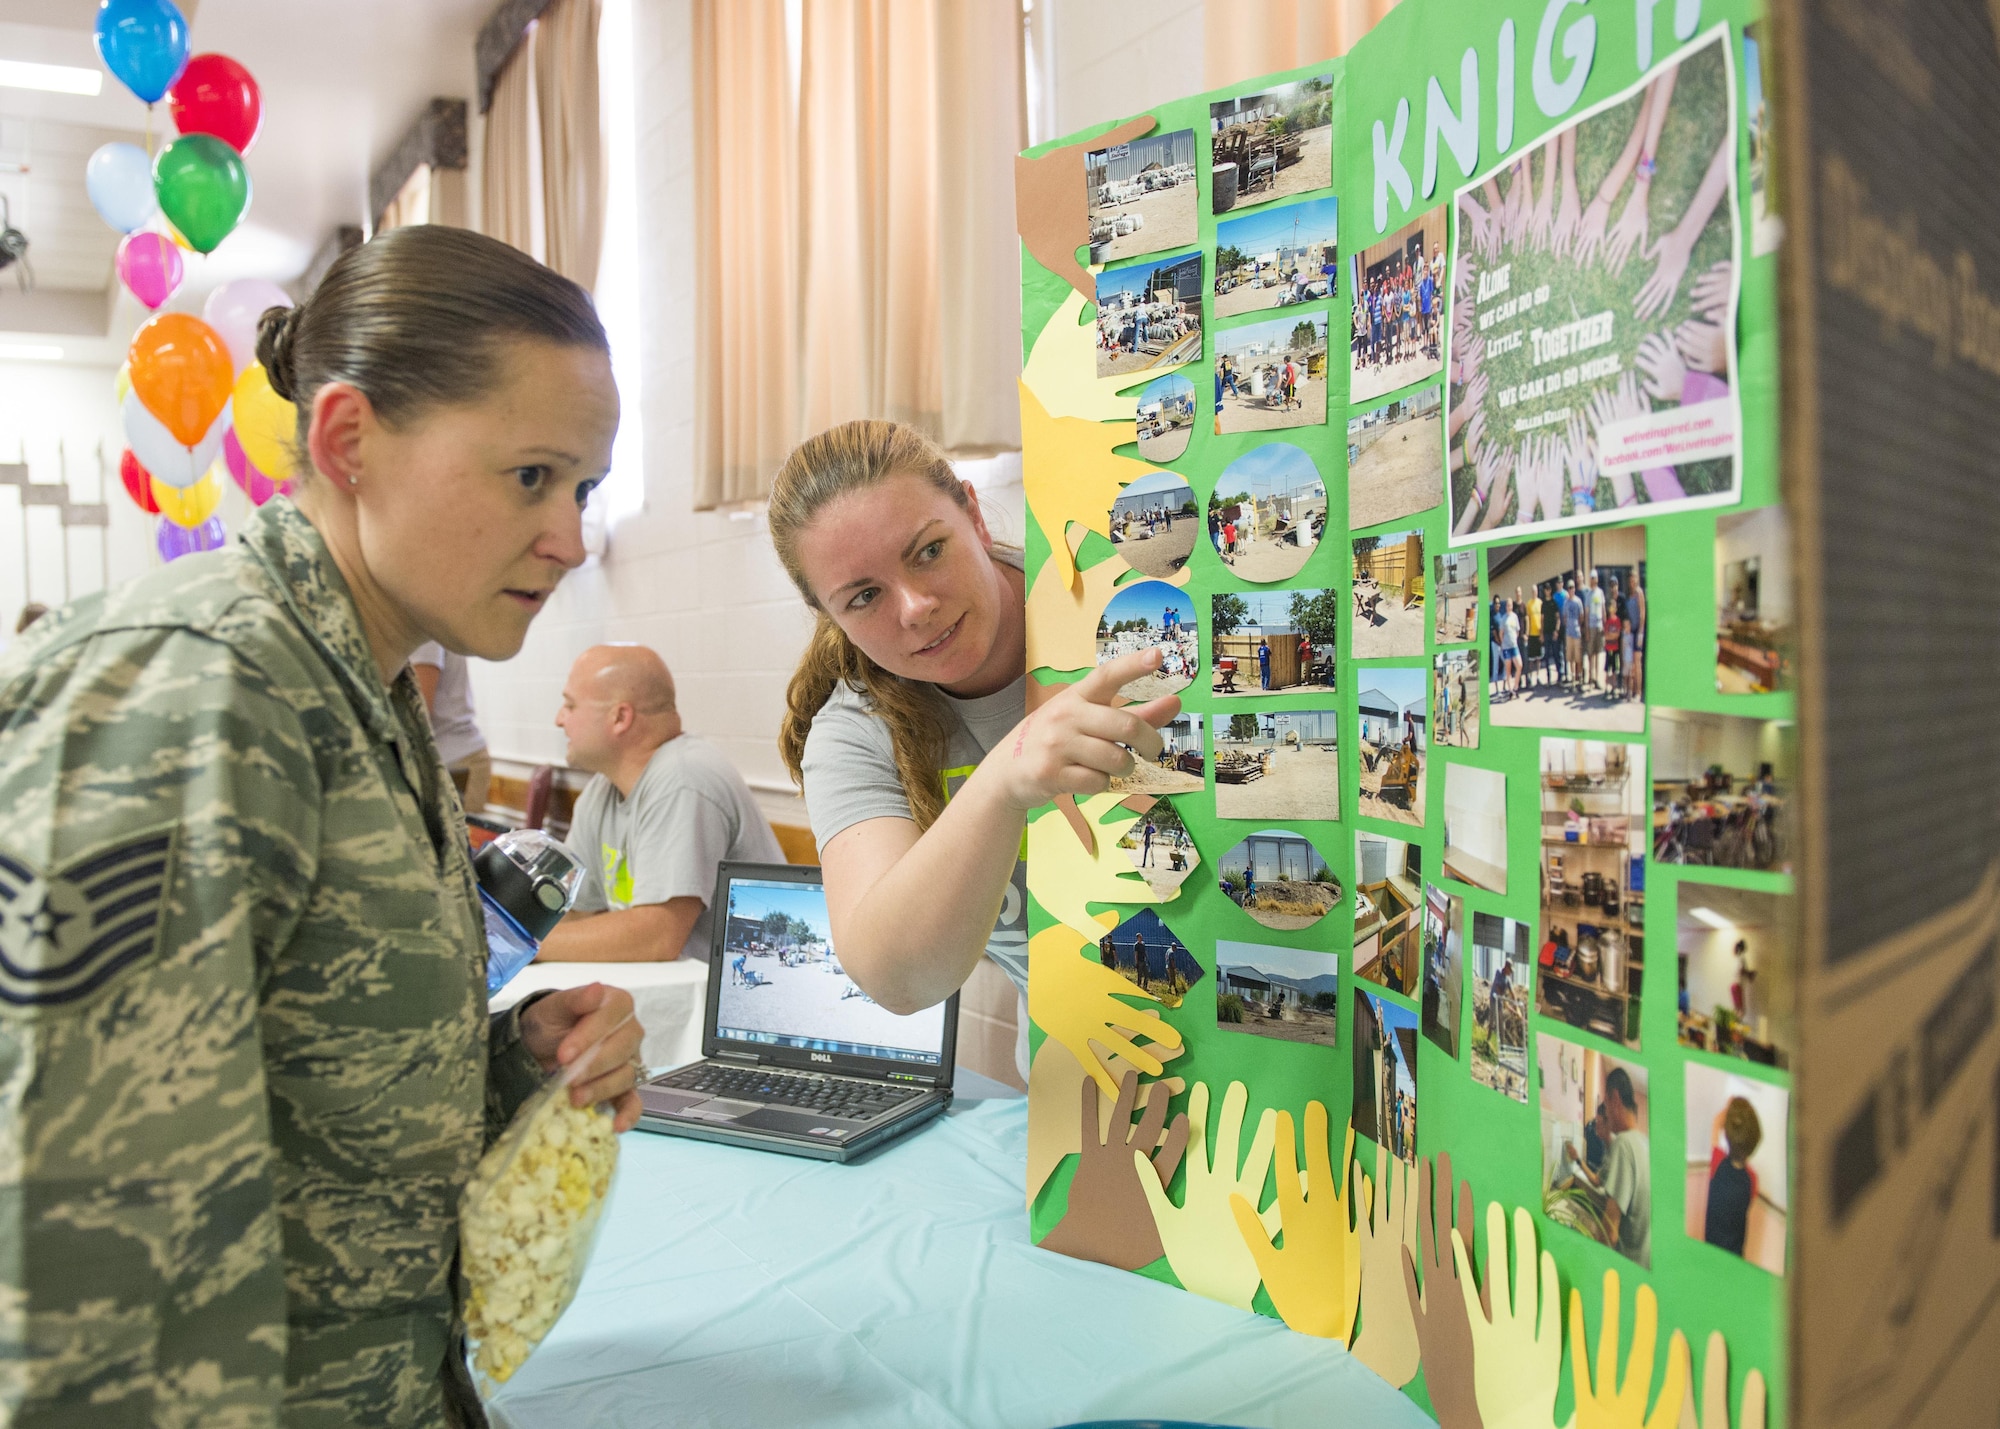 Tech. Sgt. Jennifer, the Non-Commissioned Officer In-Charge of Emergency Management, listens to Staff Sgt. Ashley, a sensor operator from the 9th Attack Squadron here, shows pictures of the project her team, The Knights, did during the Big Give as part of the Big Give after-party August 12, 2016 at Holloman Air Force Base, N.M. Over the course of three weeks, 32 teams of 412 participants spent nearly 5,000 man hours volunteering in the local community — saving the area $202,092.33. (Last names are being withheld due to operational requirements. U.S. Air Force photo by Airman 1st Class Randahl J. Jenson)